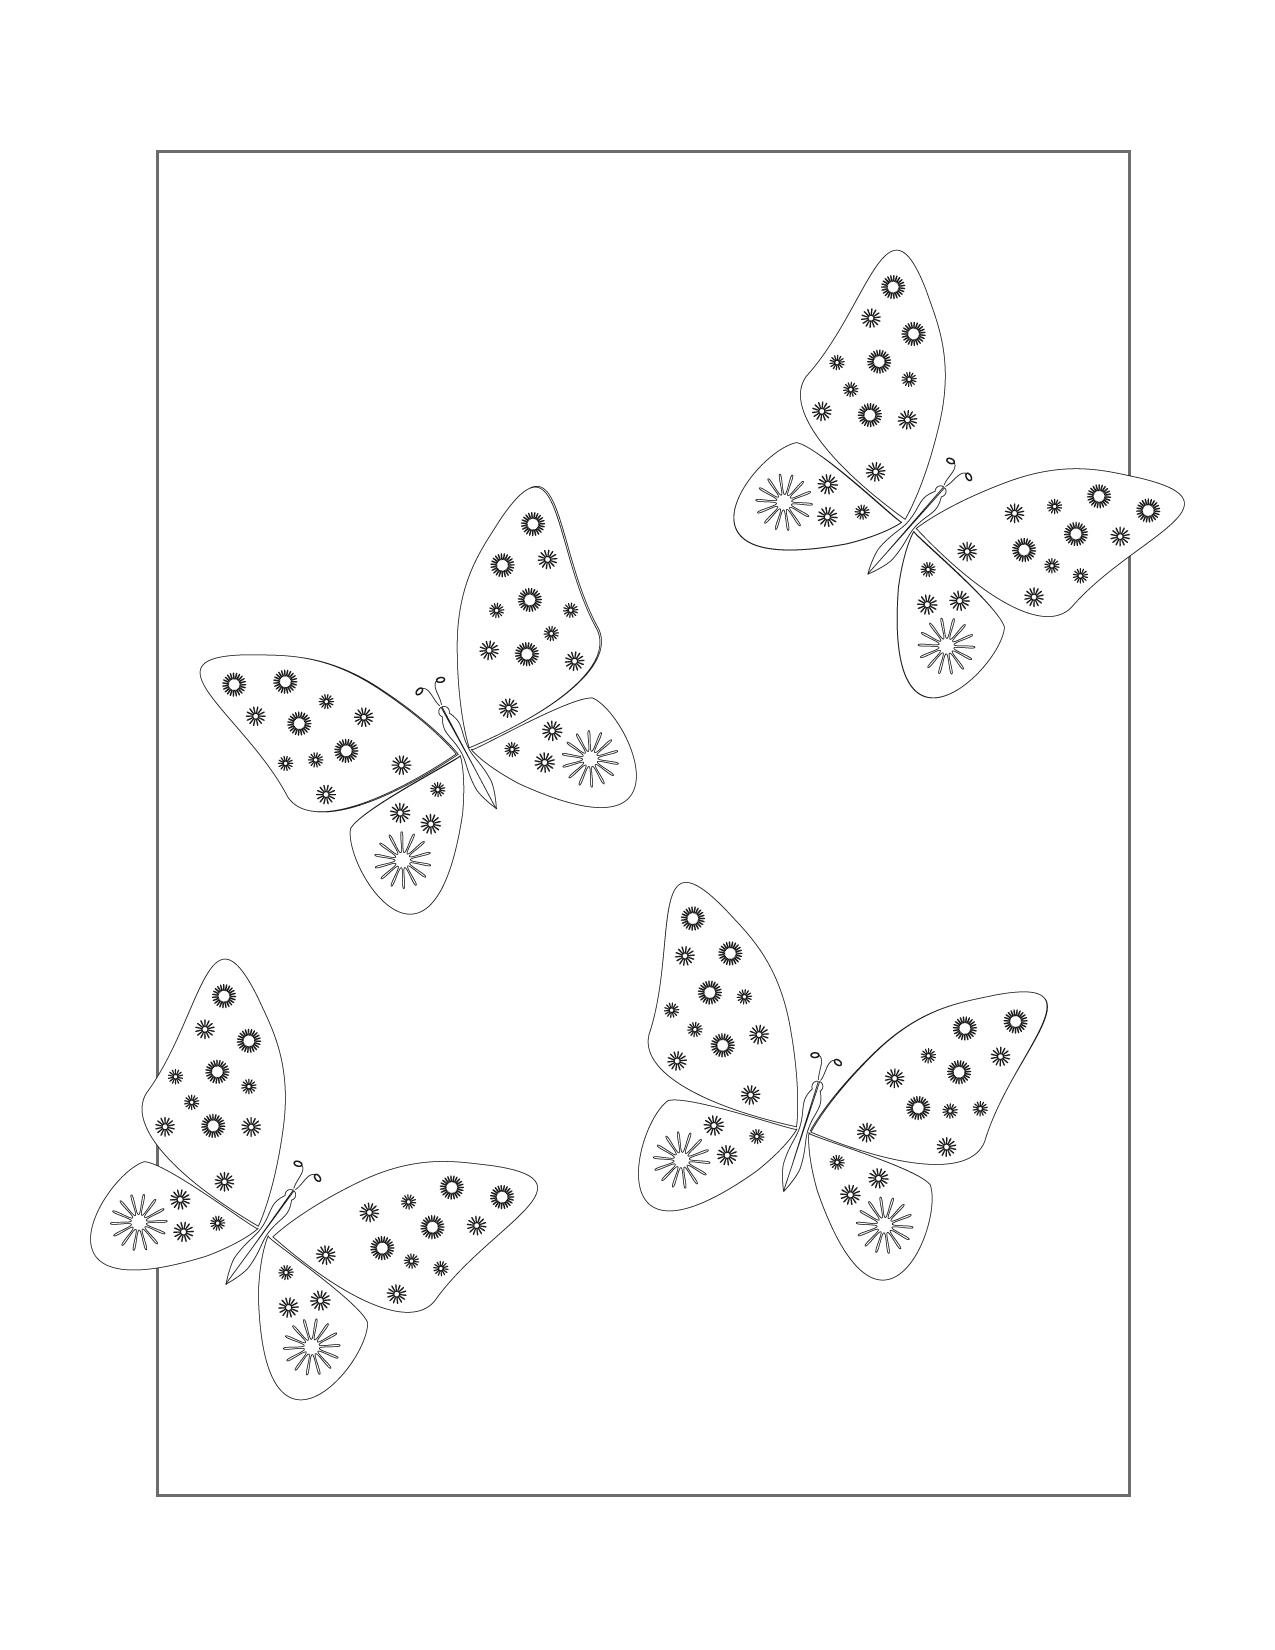 Starburst Buttefly Coloring Page